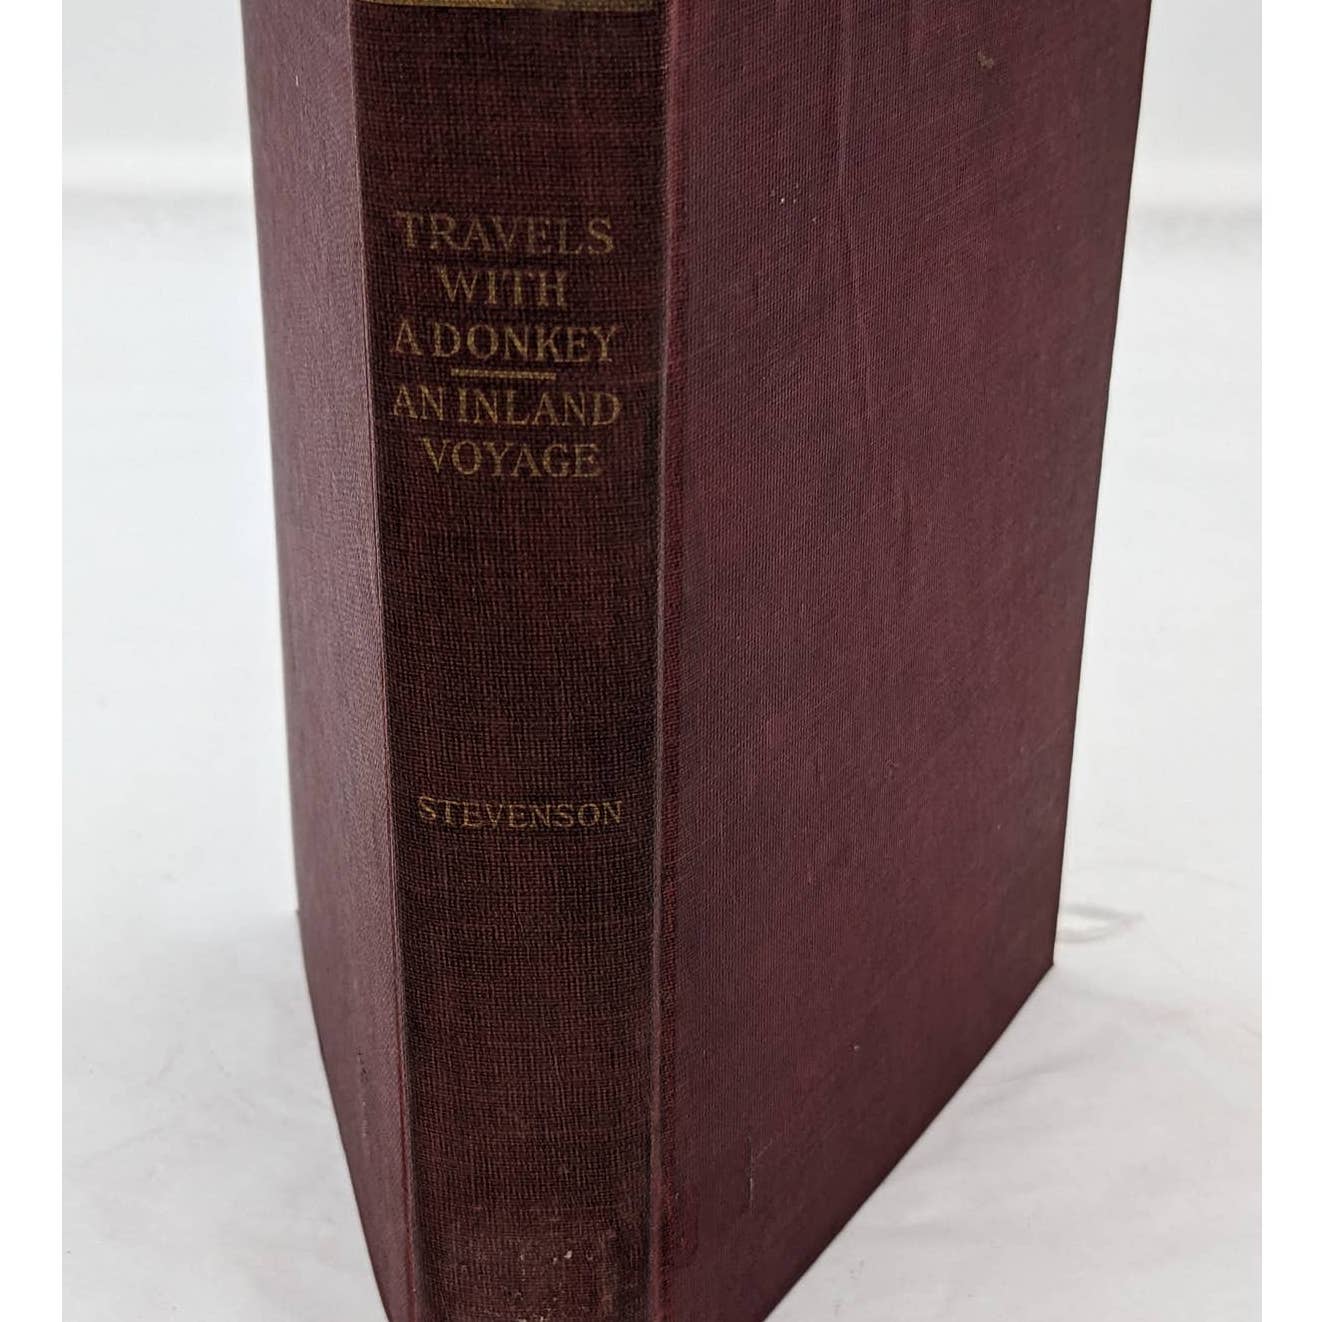 Travels With A Donkey In Cevennes Inland Voyage By Robert Louis Stevenson  1909